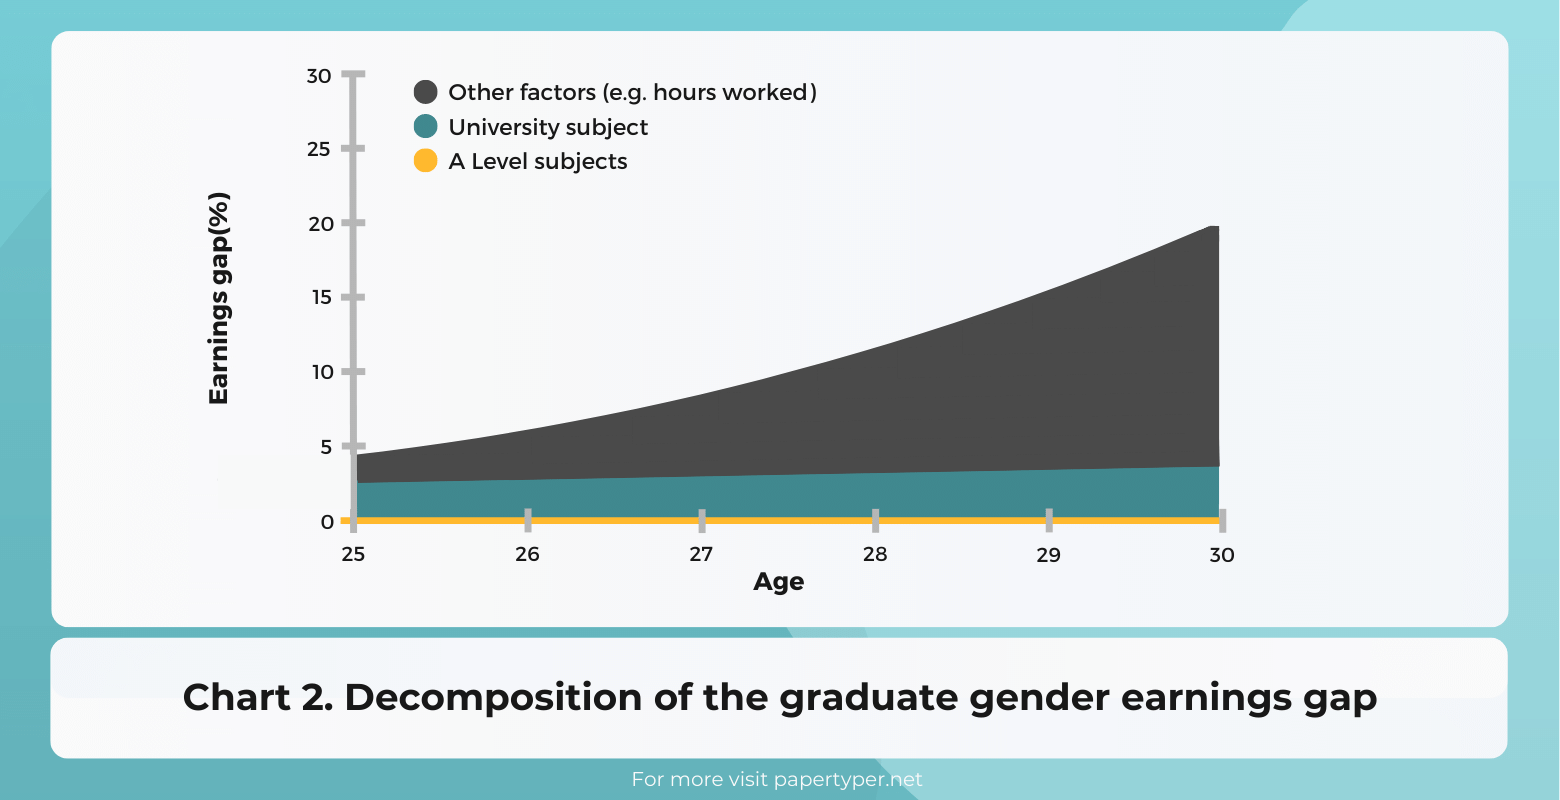 Decomposition of the graduate gender earnings gap